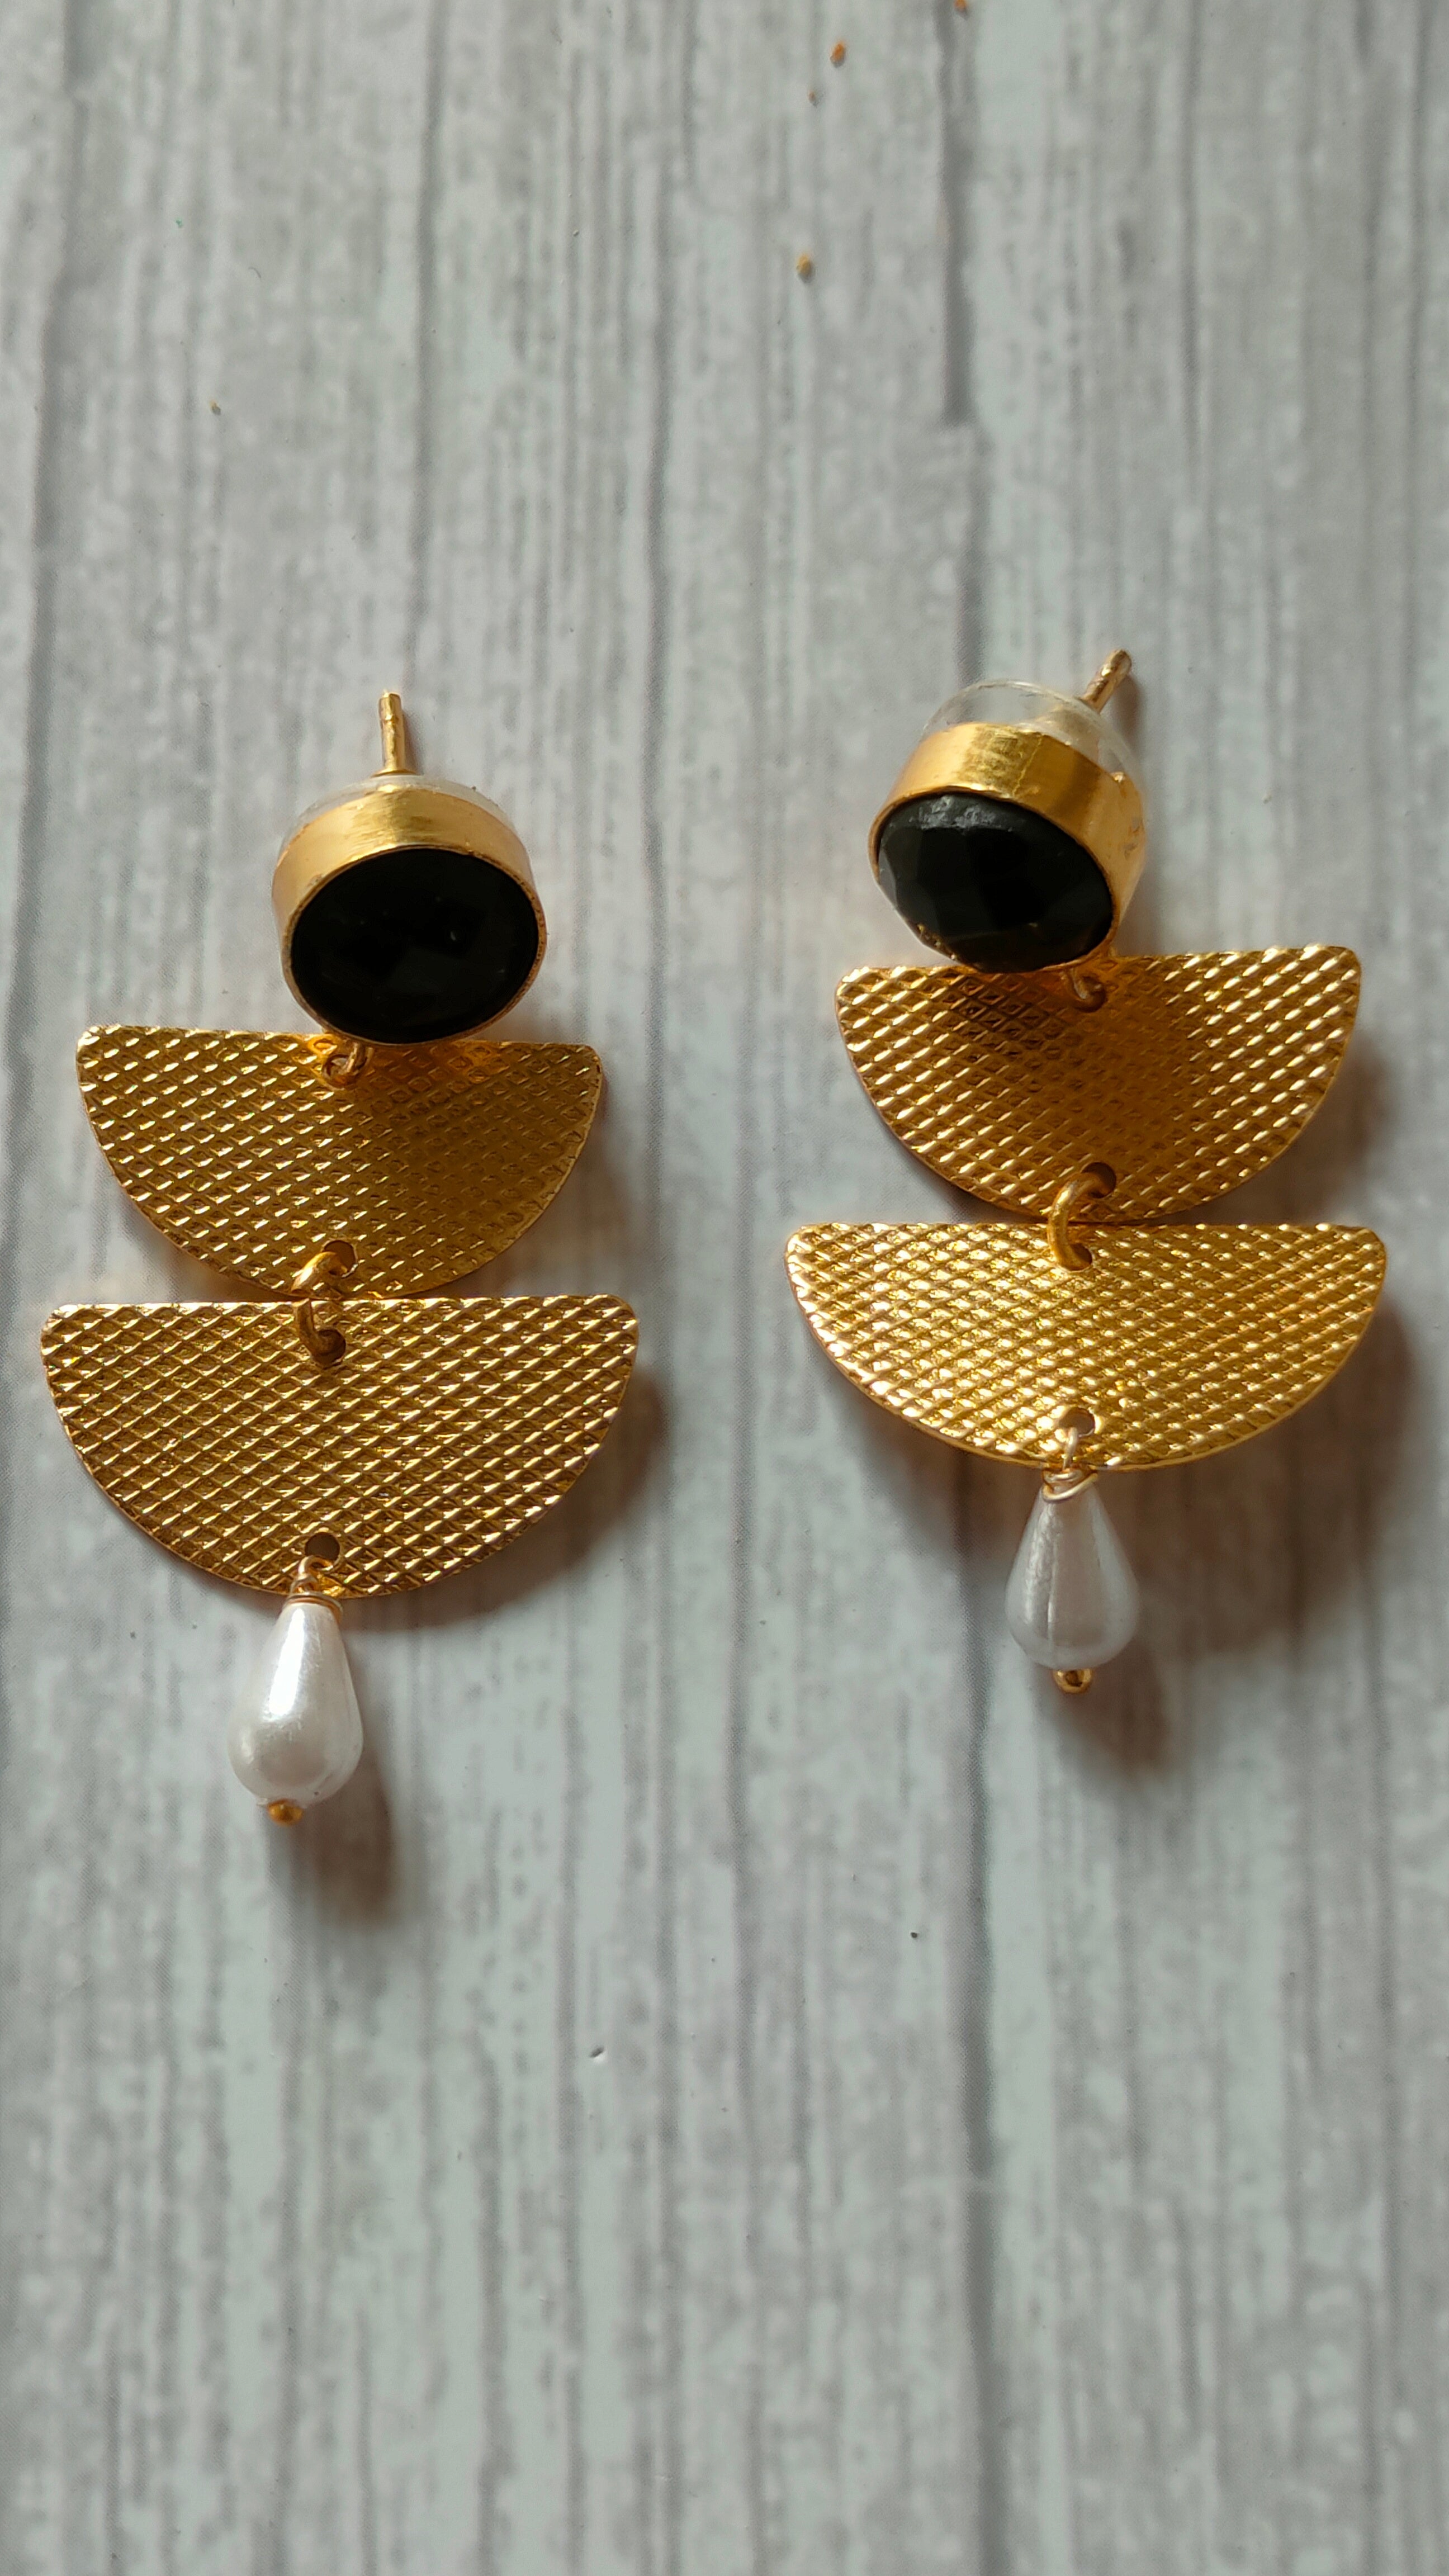 2 Layer Brass Earrings with Black Stone and Pearl Beads